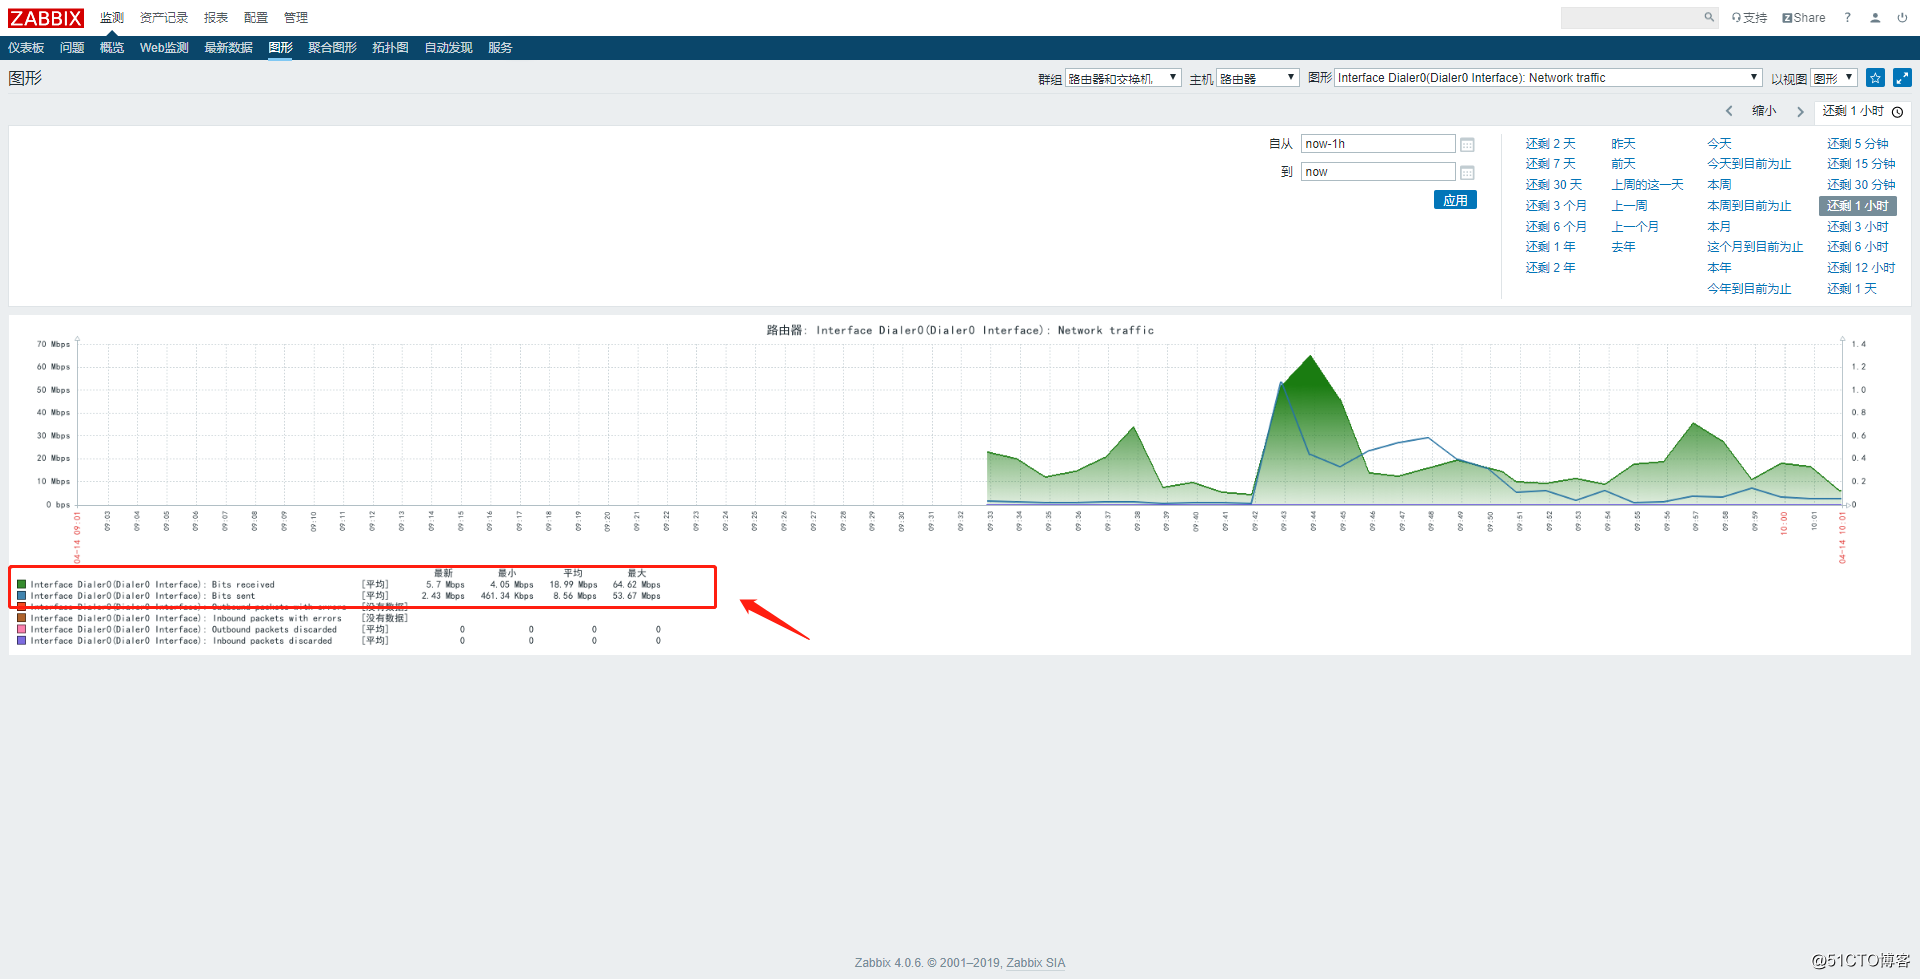 Collect traffic from network devices through zabbix